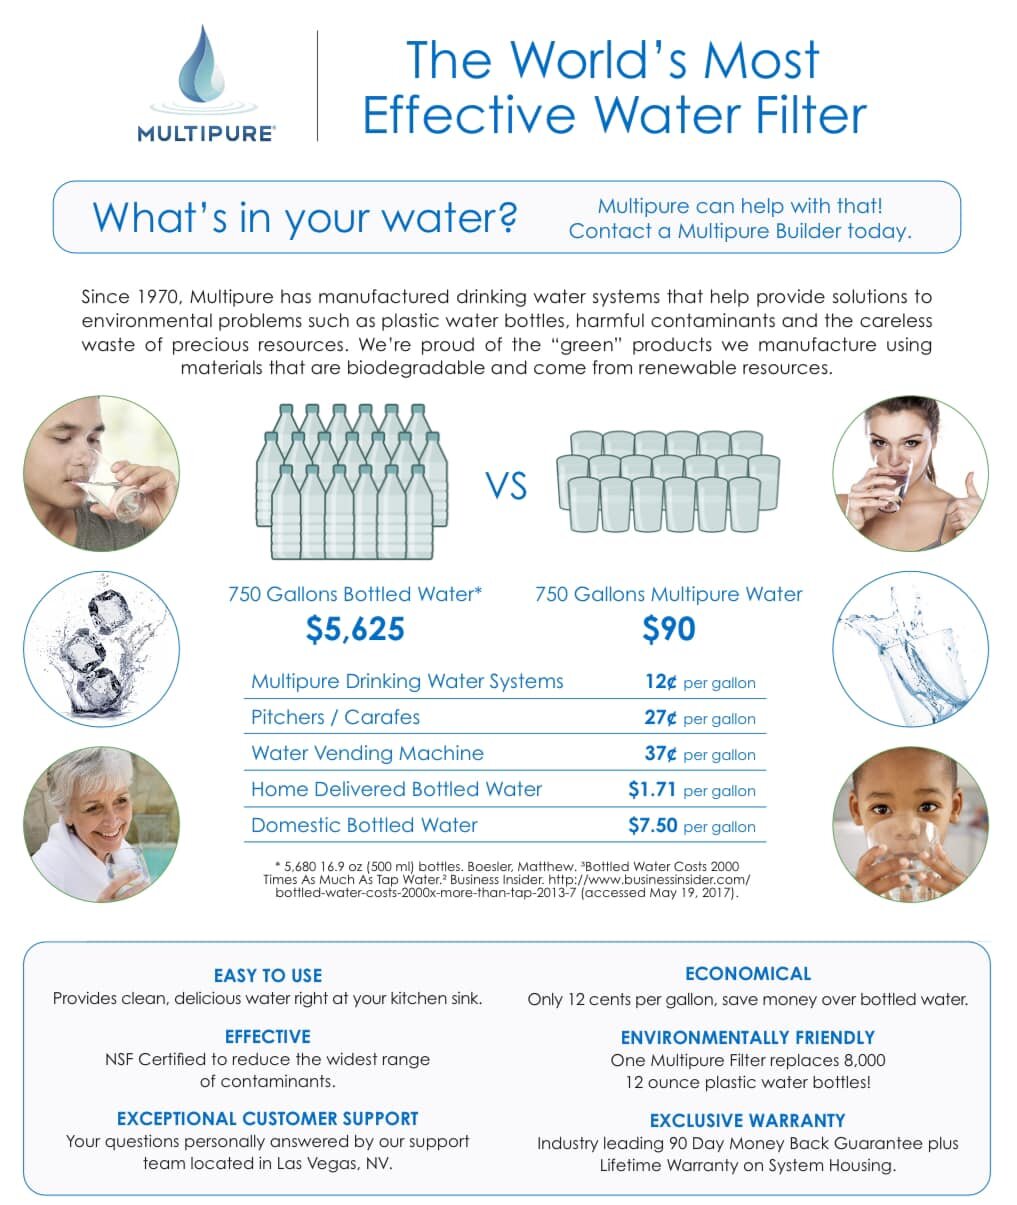 Filtration is the first most important thing to consider with your drinking water. Bottled Water is simply ridiculous at this point and if you are still buying cases or singles at the minimart please consider a Multipure filtration unit so you can cu